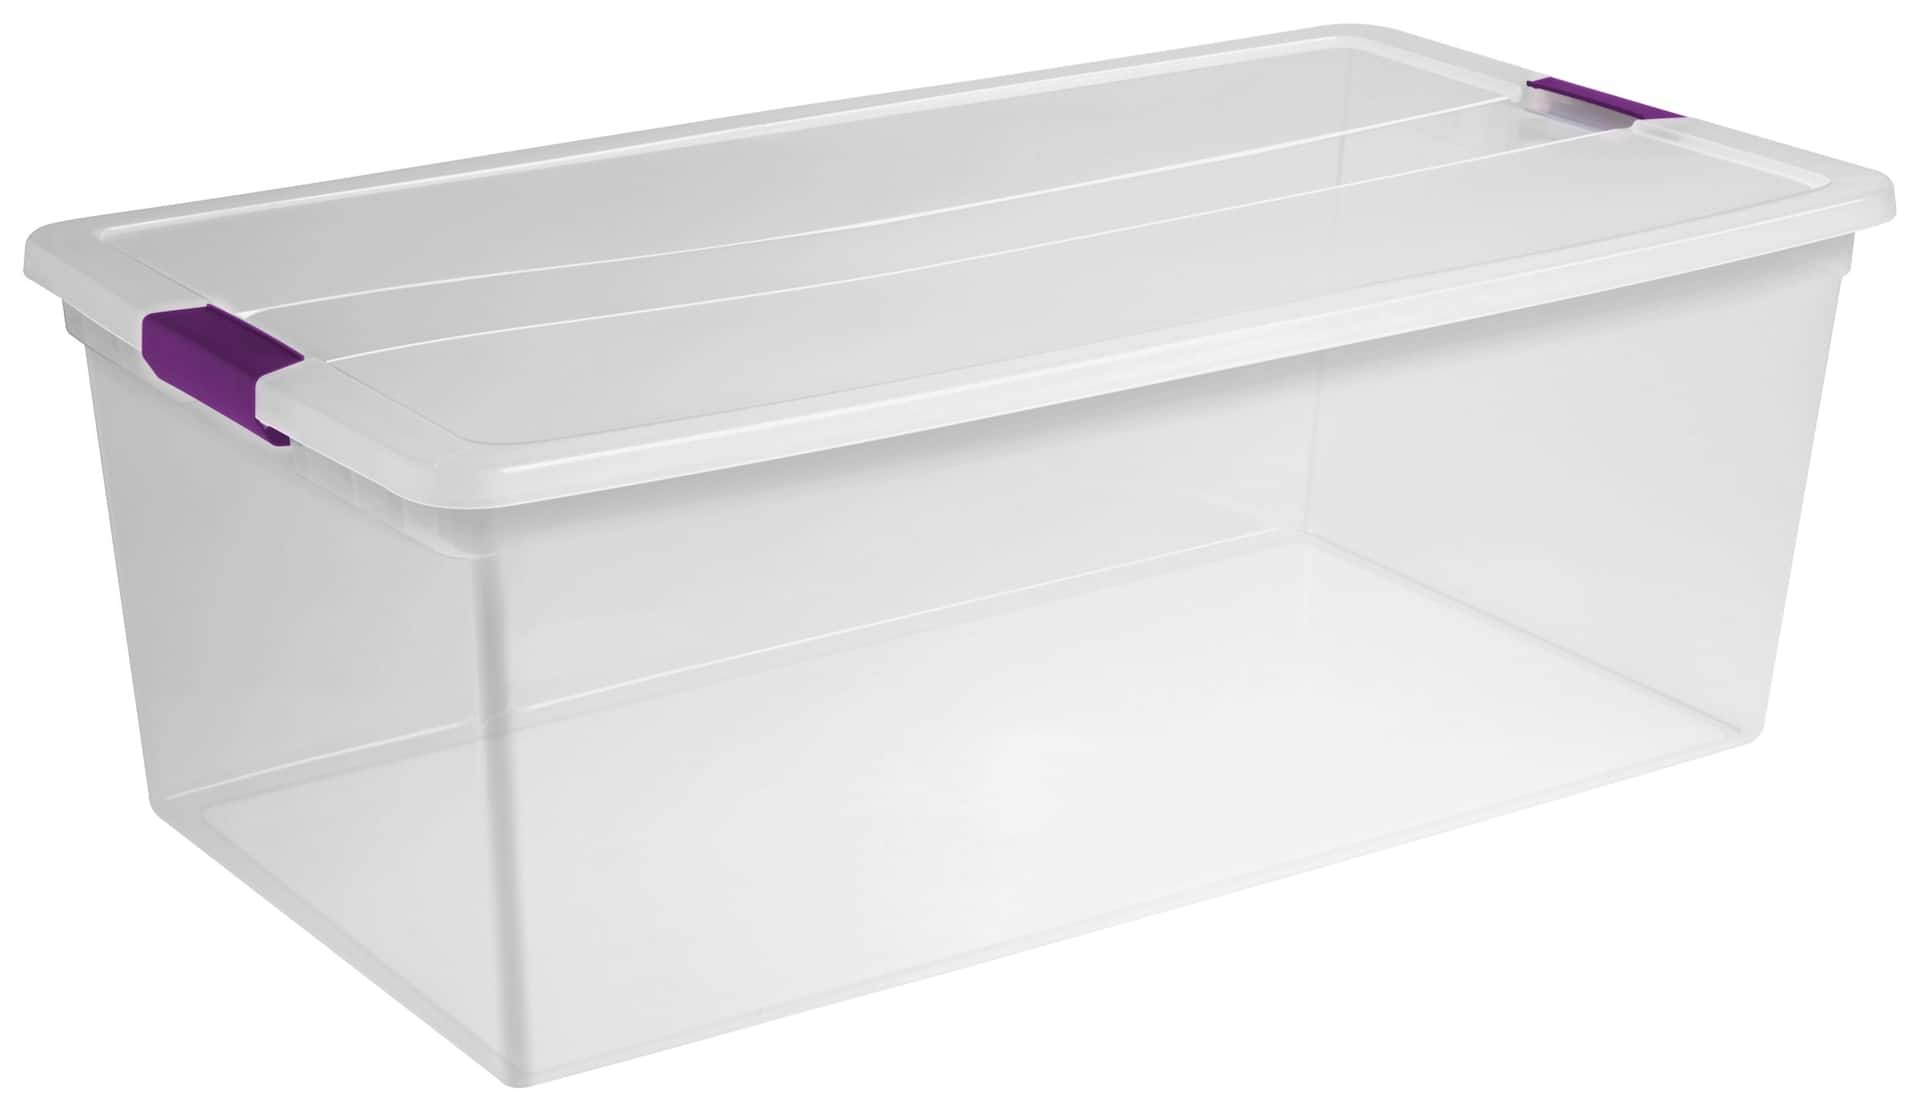 Sterilite ClearView Storage Box with Latched Lid, 104-L